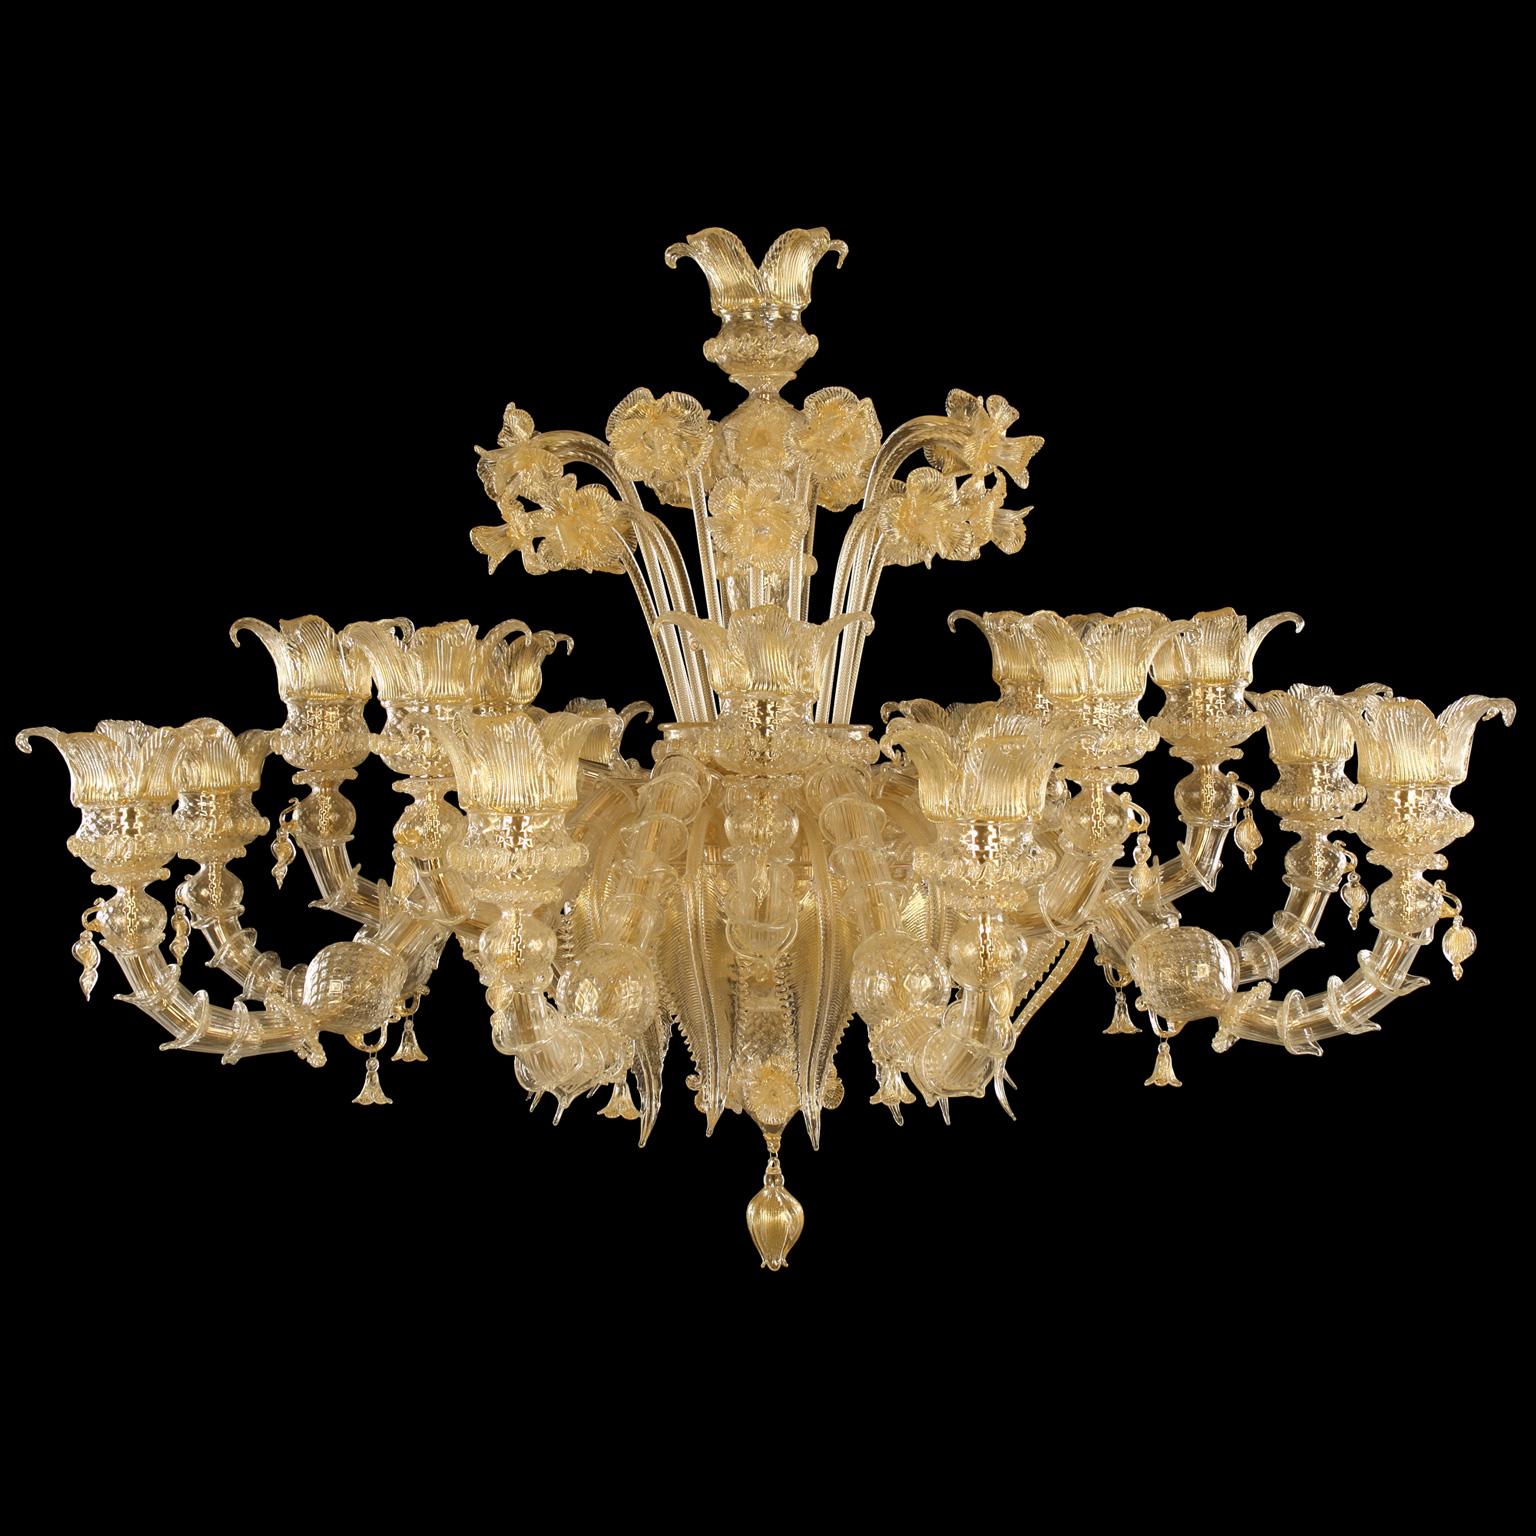 The Murano glass chandelier Regale is a romantic lighting work, inspired from the luxurious halls of the venetian buildings on the Canal Grande.
The colors, the floral decorations, the Rezzonico arms, the pendant elements… all the characteristics of